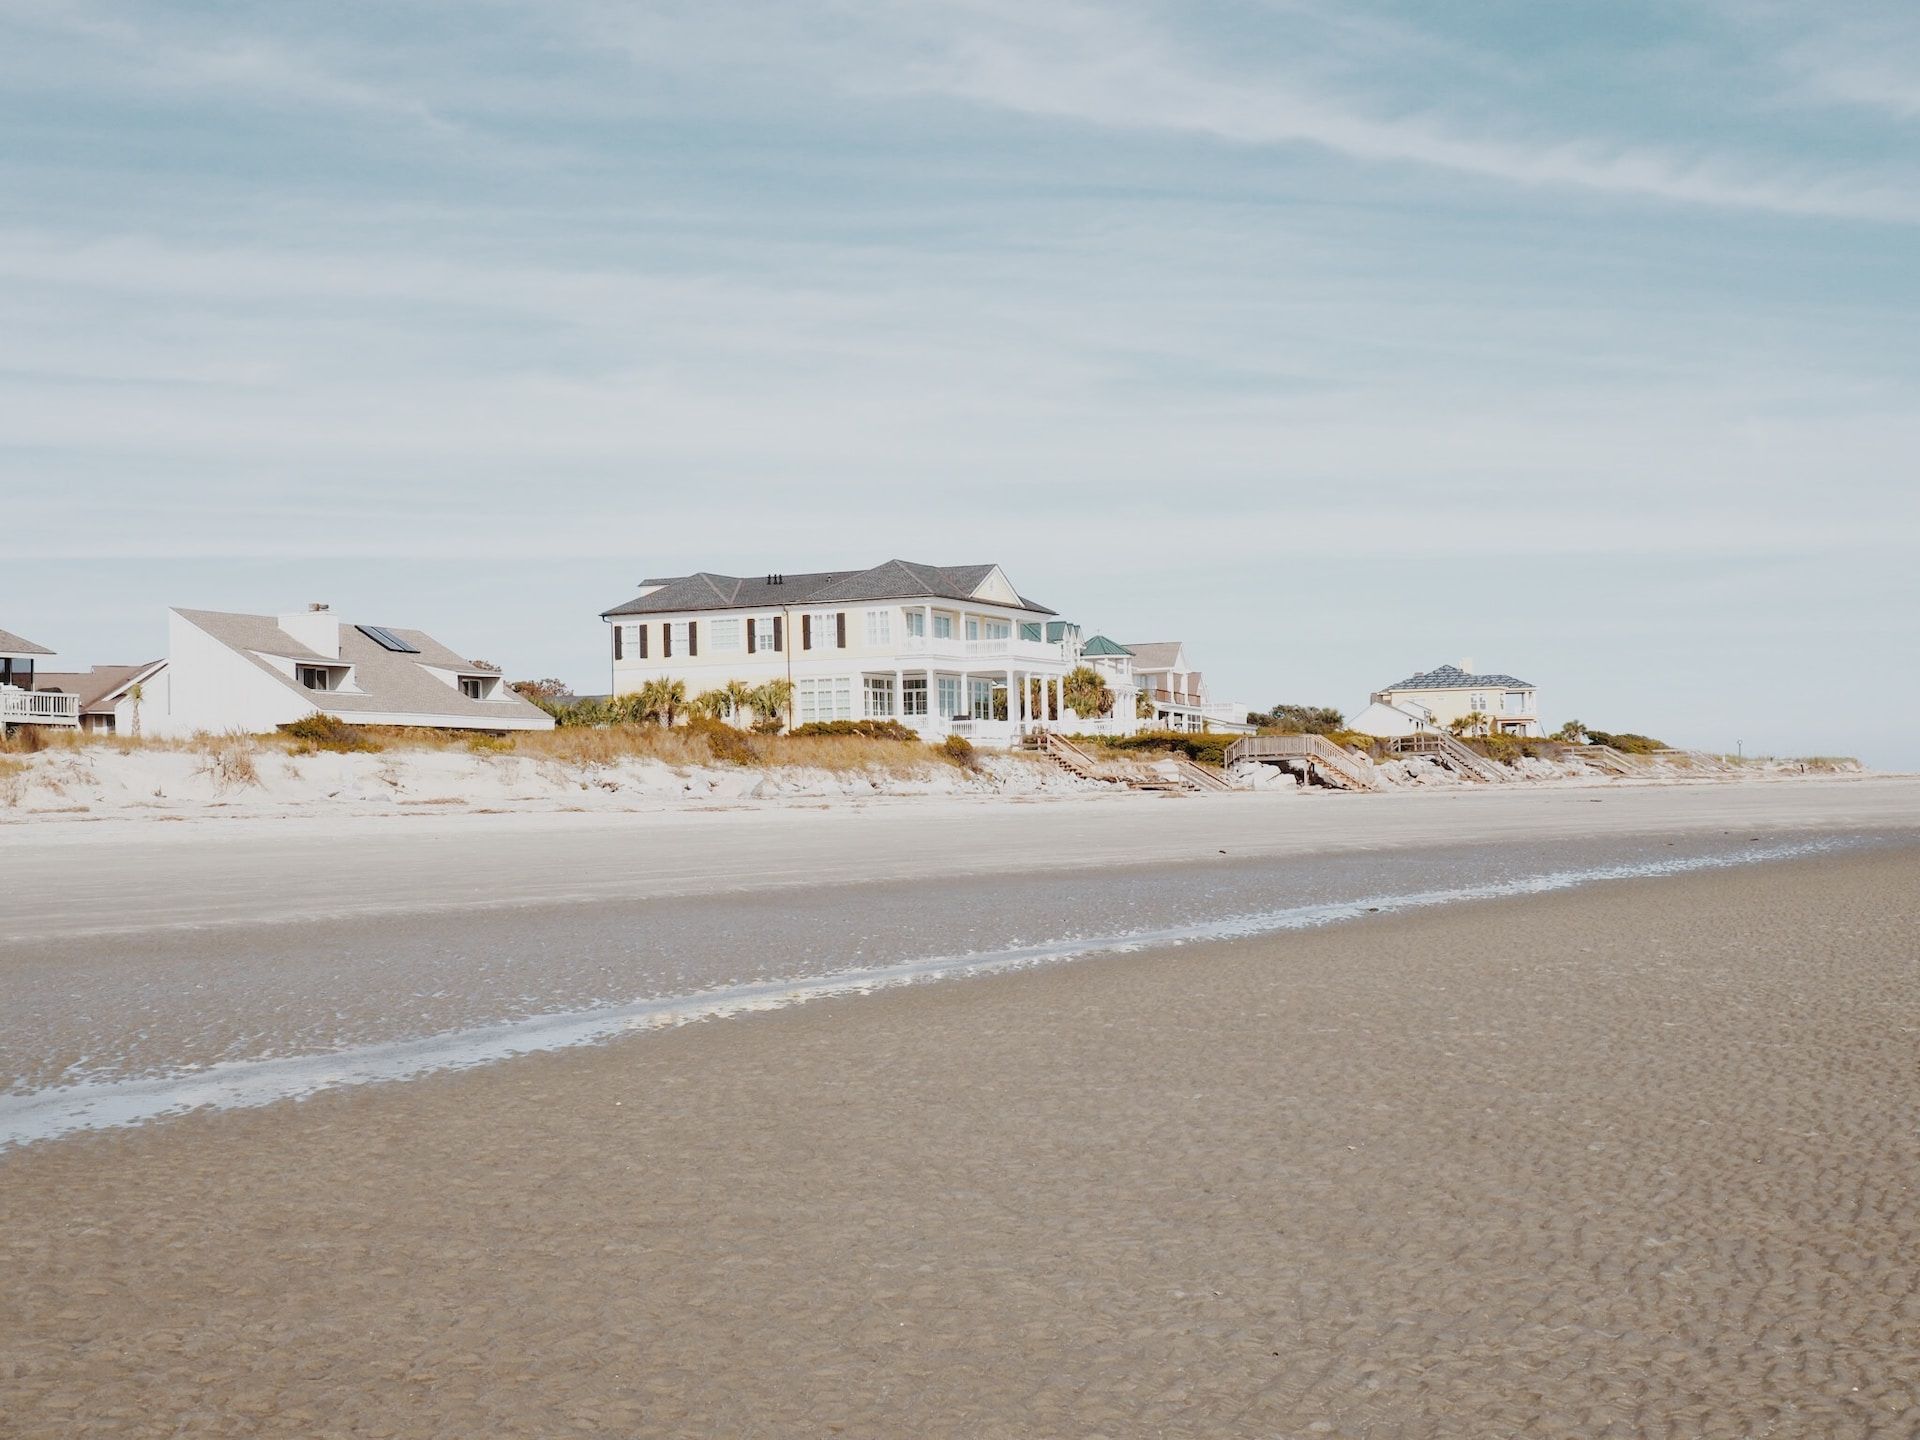 Oceanfront vacation rentals on Seabrook Island